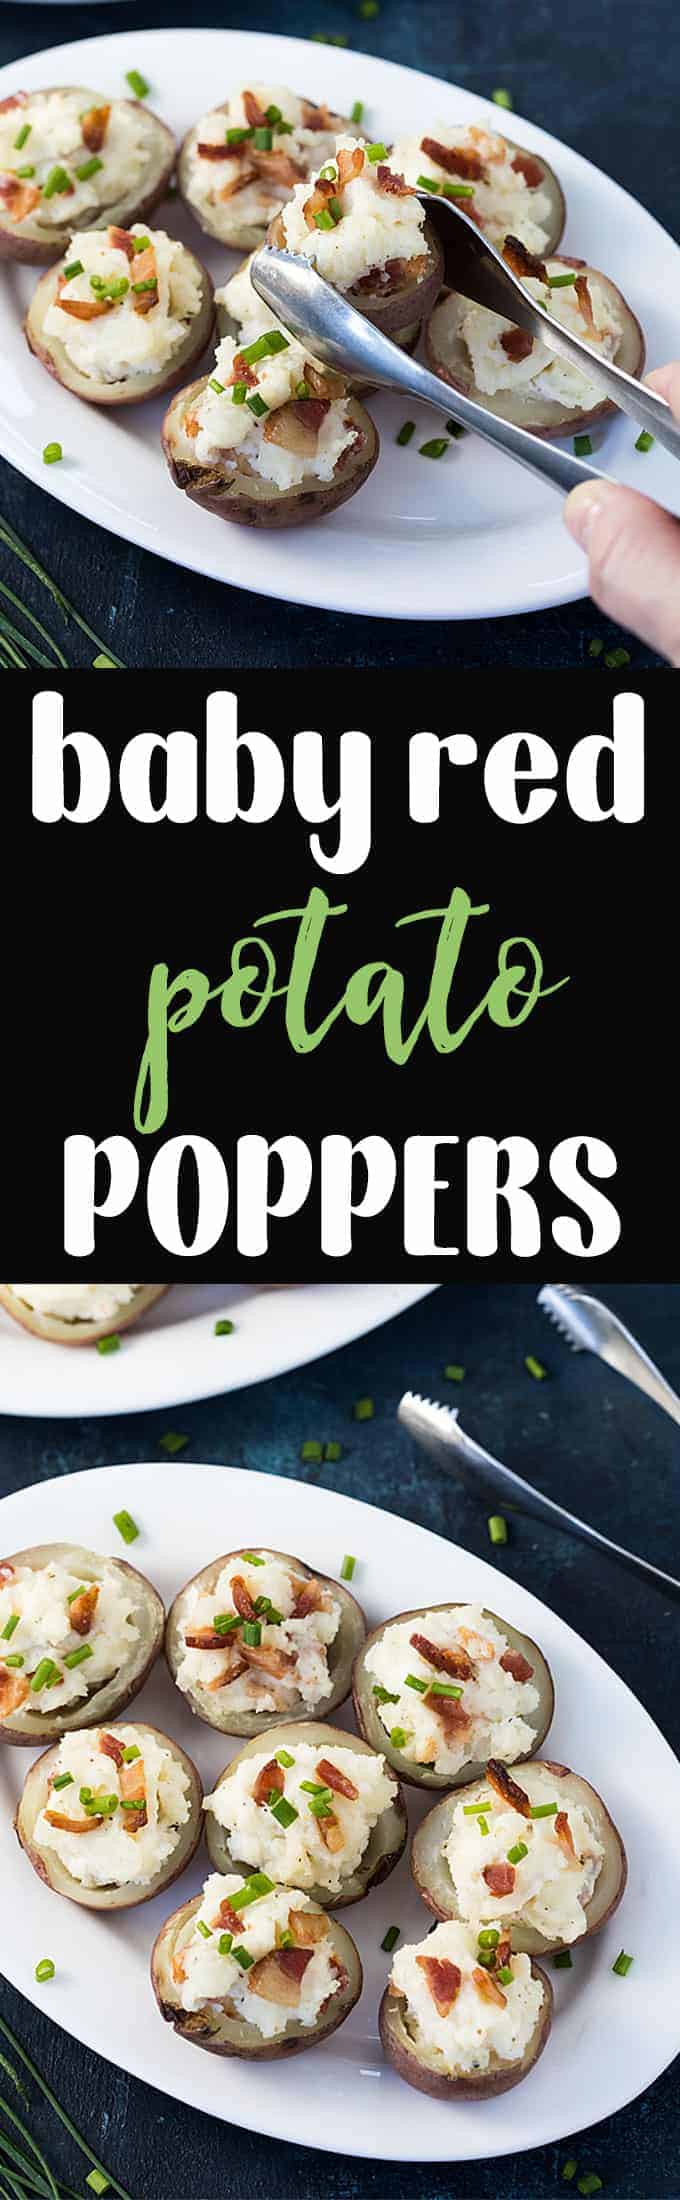 A two image vertical collage of red potato poppers with overlay text in the center.